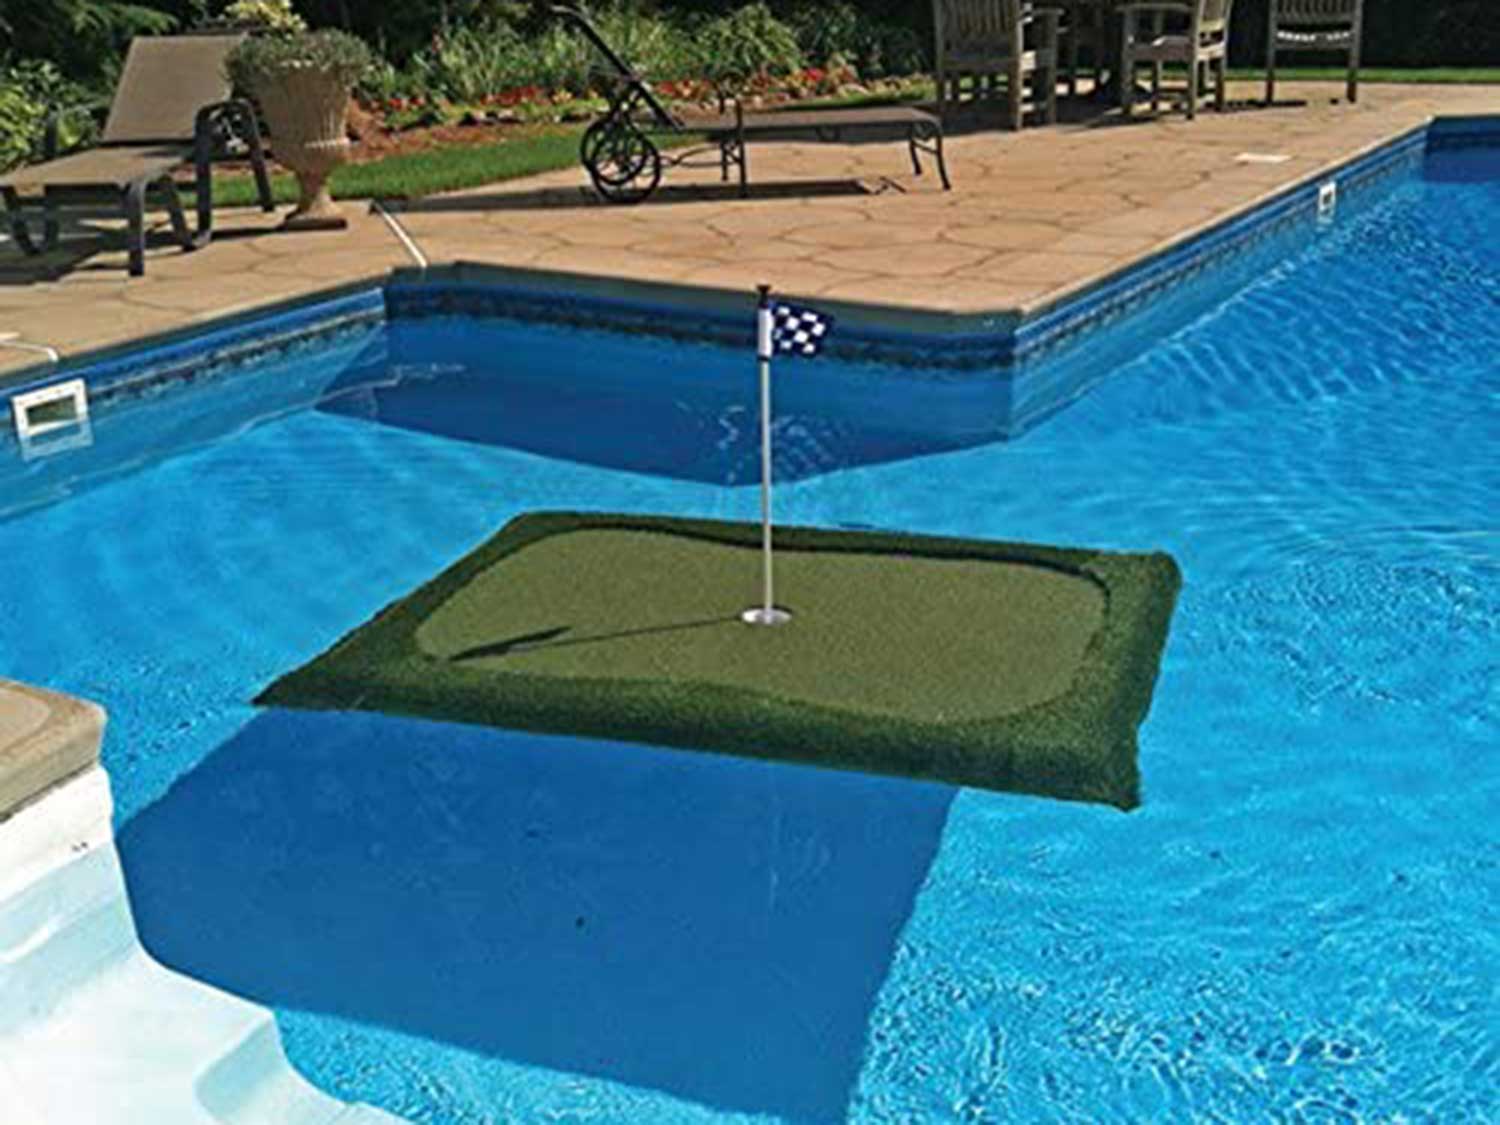 floating putting green